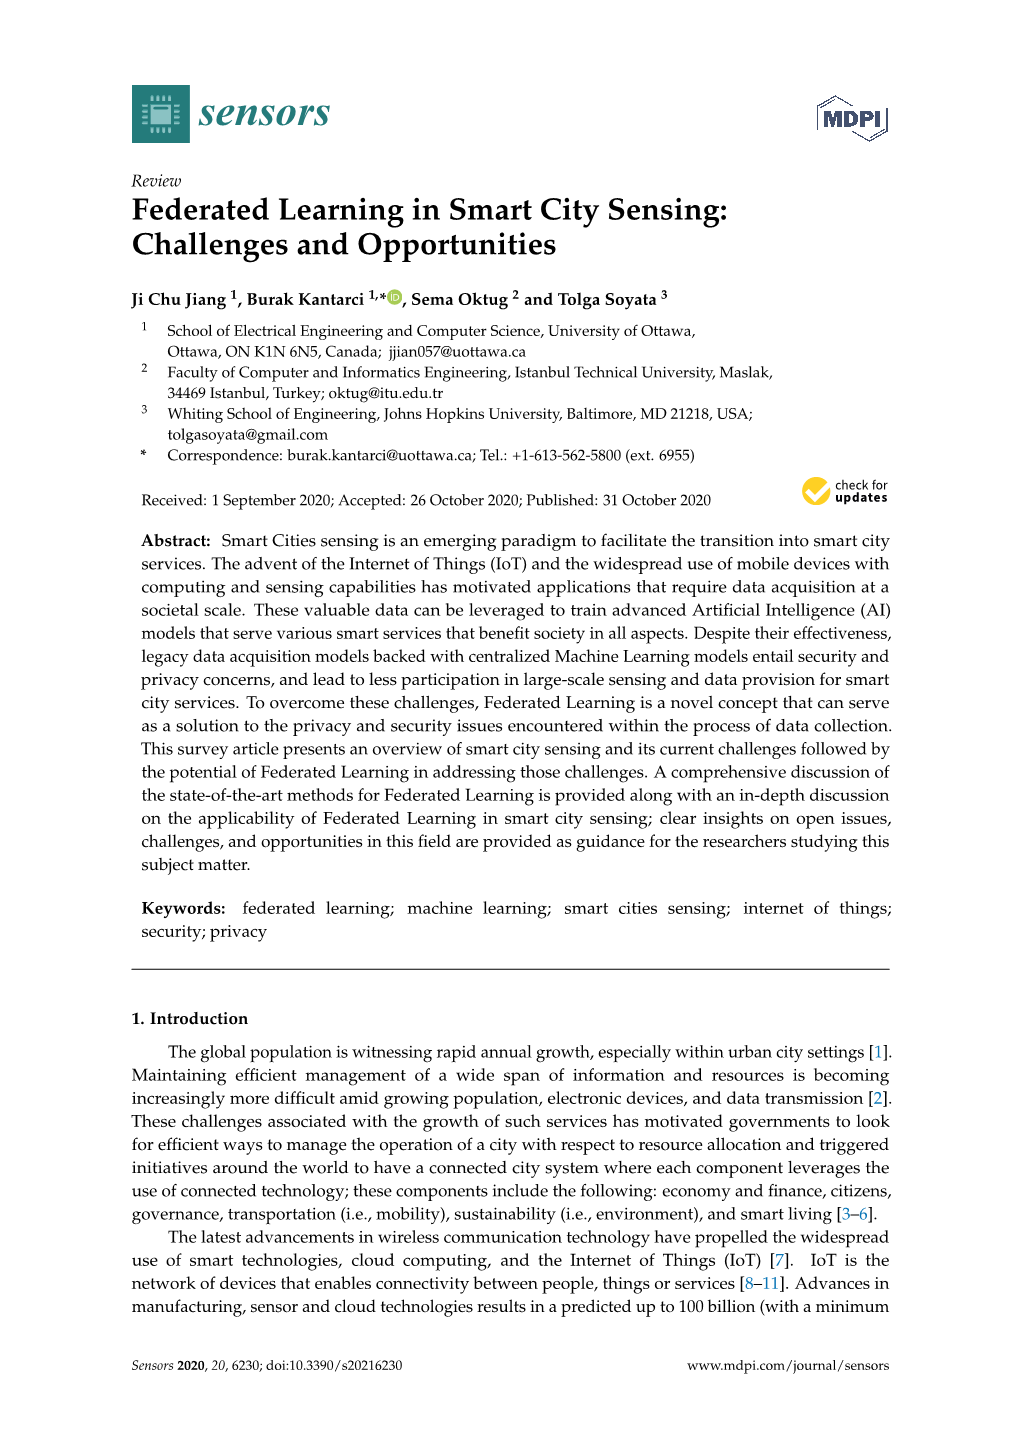 Federated Learning in Smart City Sensing: Challenges and Opportunities